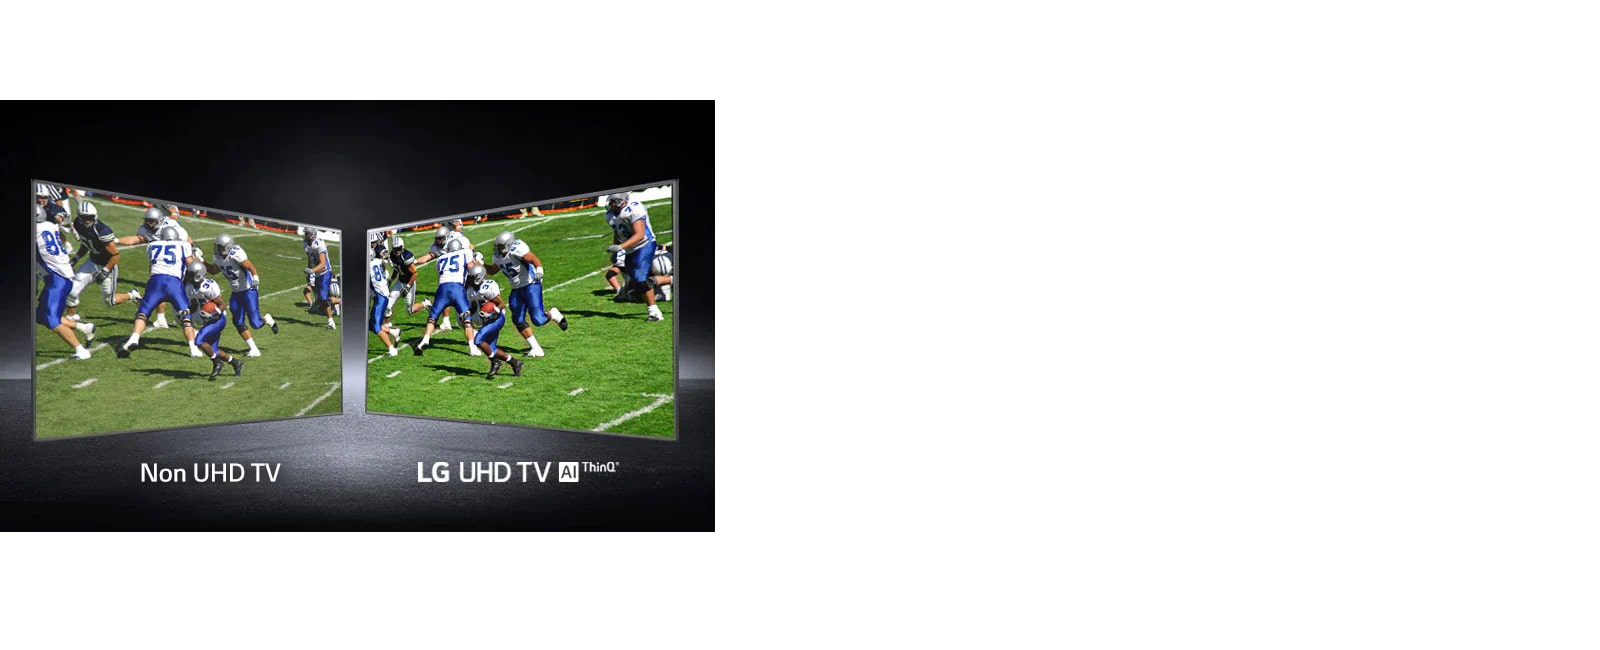 A picture of players playing on a football field shown at views. One shown on a conventional screen and one on an UHD TV.